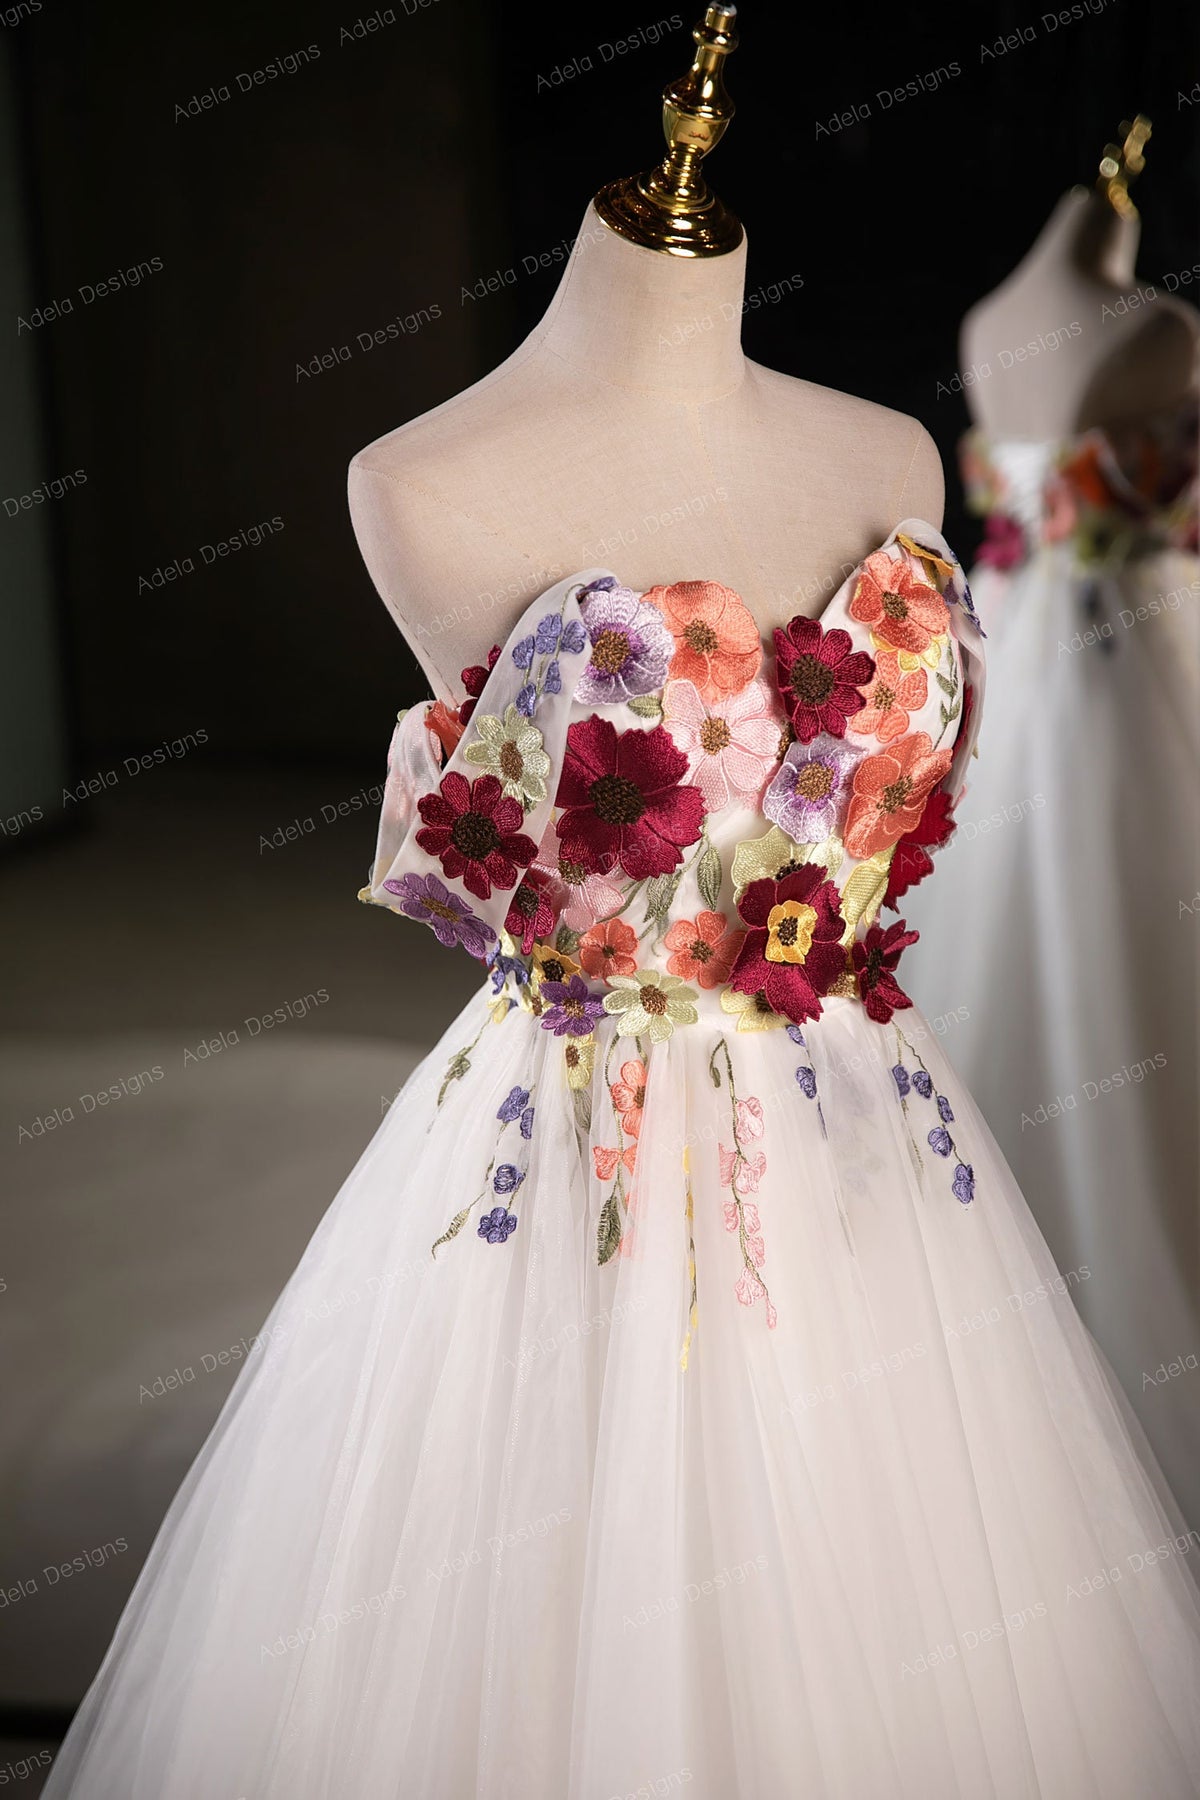 3D Floral Lace Ball Gown Wedding Dress Bridal Detachable Off The Shoulder Straps Lace Open Back Sleeveless Strapless Corset Back Colorful